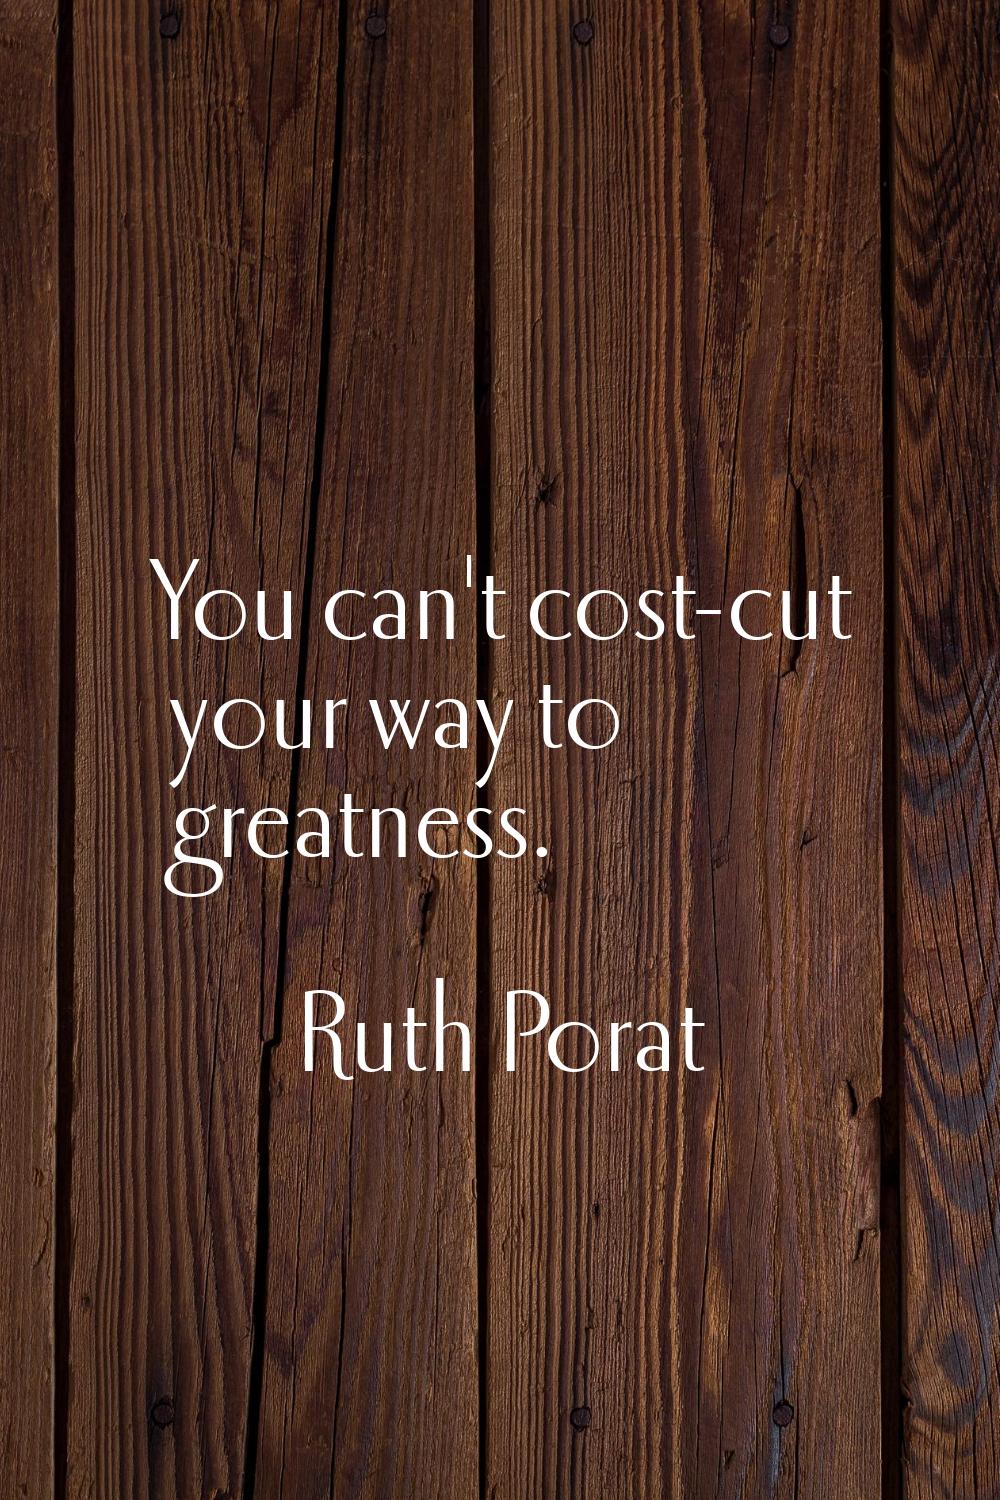 You can't cost-cut your way to greatness.